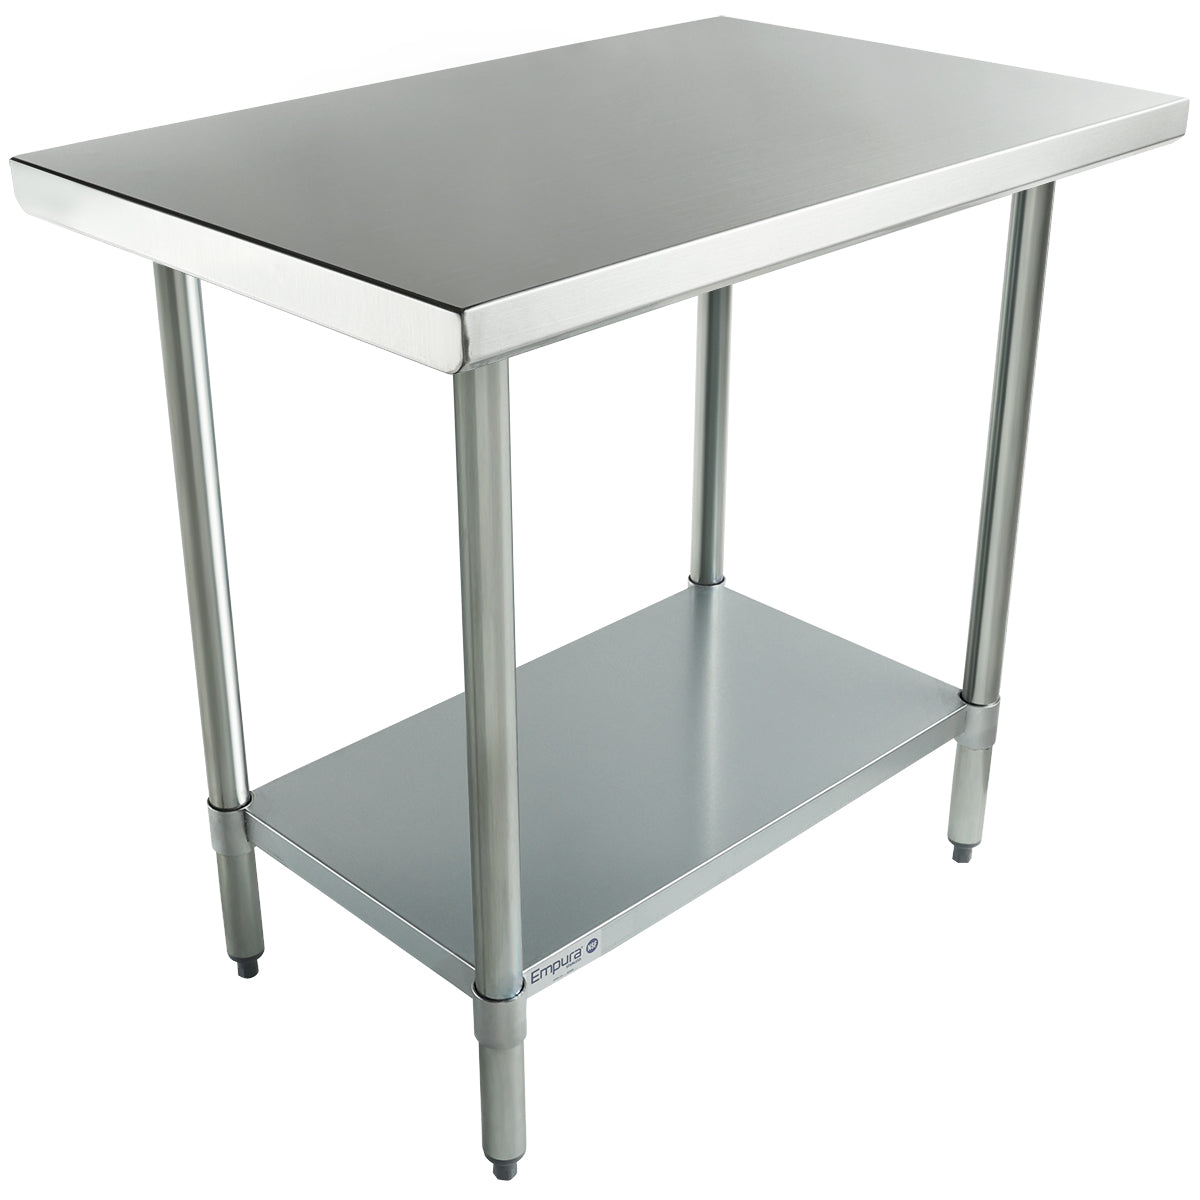 Empura 36" x 24" 18-Gauge 304 Stainless Steel Commercial Work Table with Flat Top Galvanized Legs and Undershelf